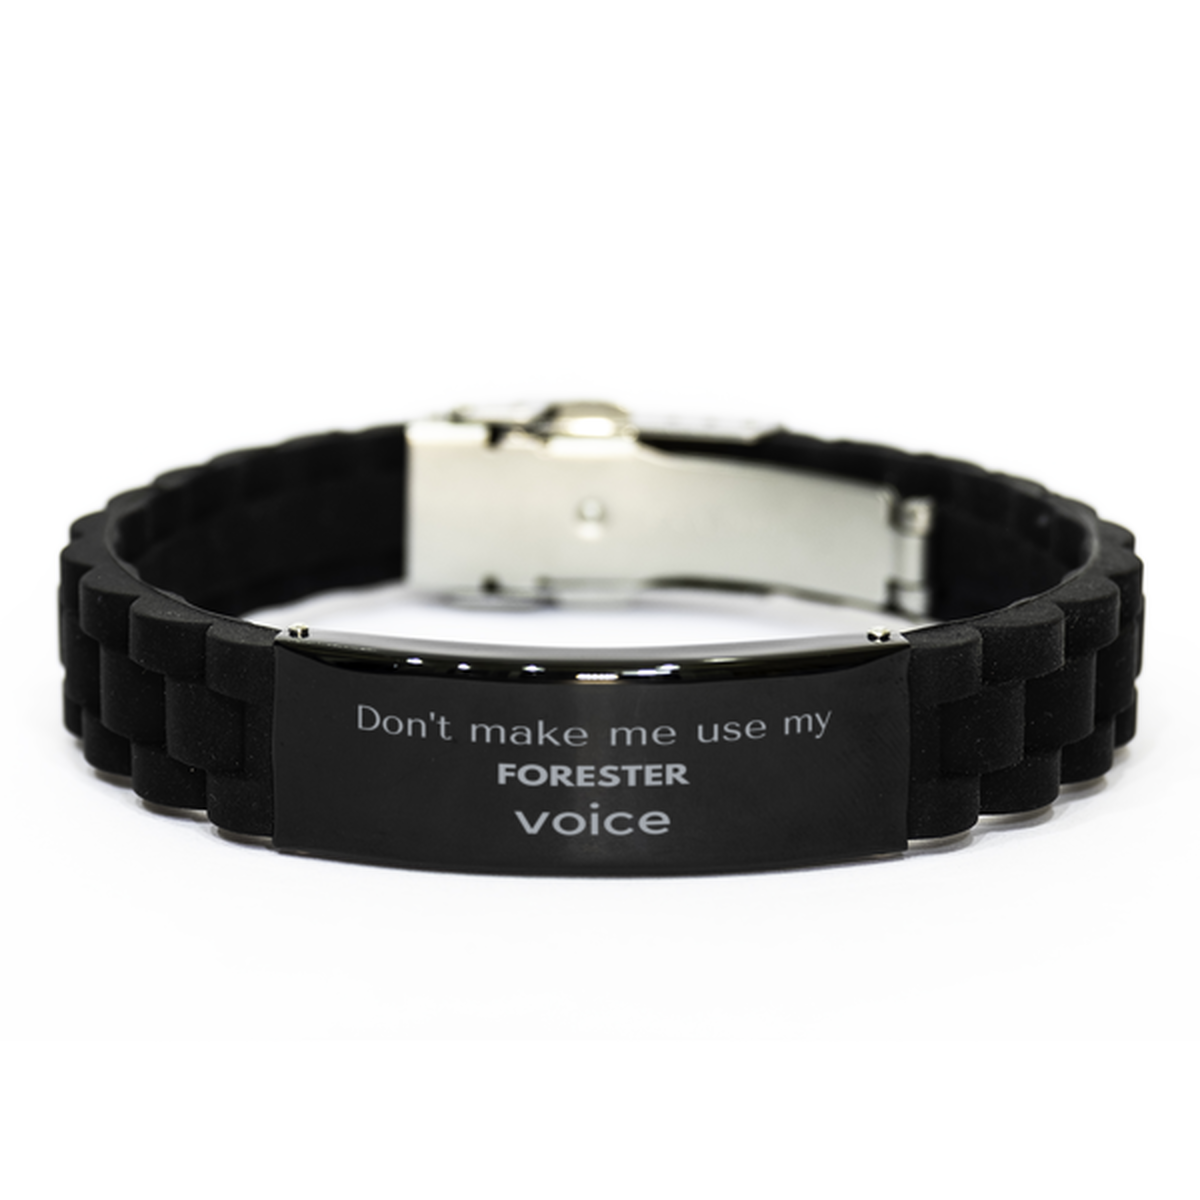 Don't make me use my Forester voice, Sarcasm Forester Gifts, Christmas Forester Black Glidelock Clasp Bracelet Birthday Unique Gifts For Forester Coworkers, Men, Women, Colleague, Friends